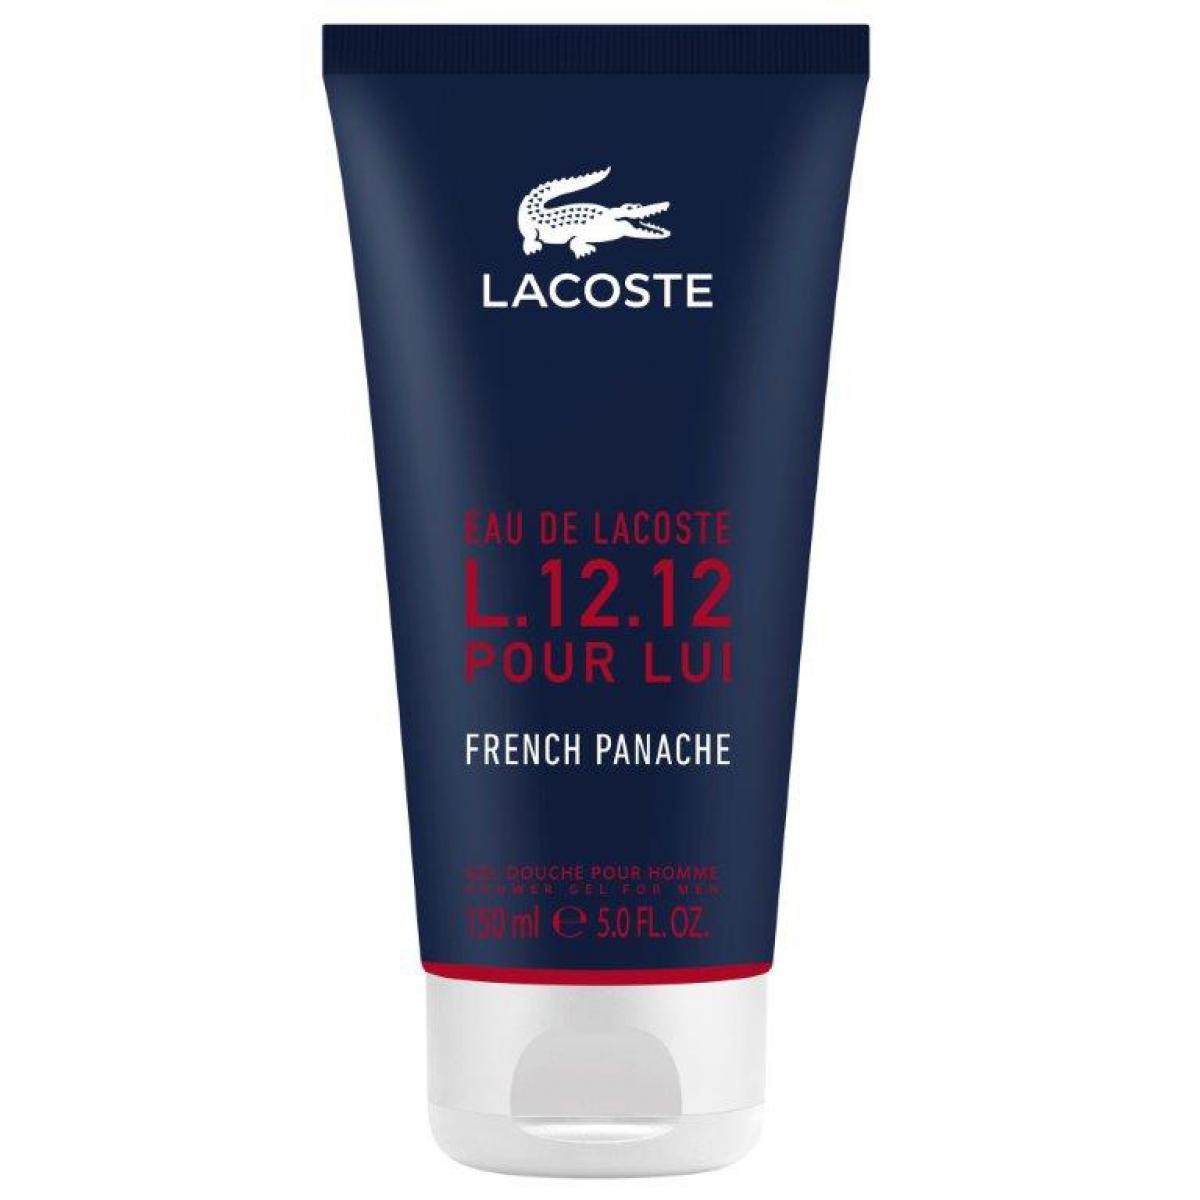 is lacoste a french brand